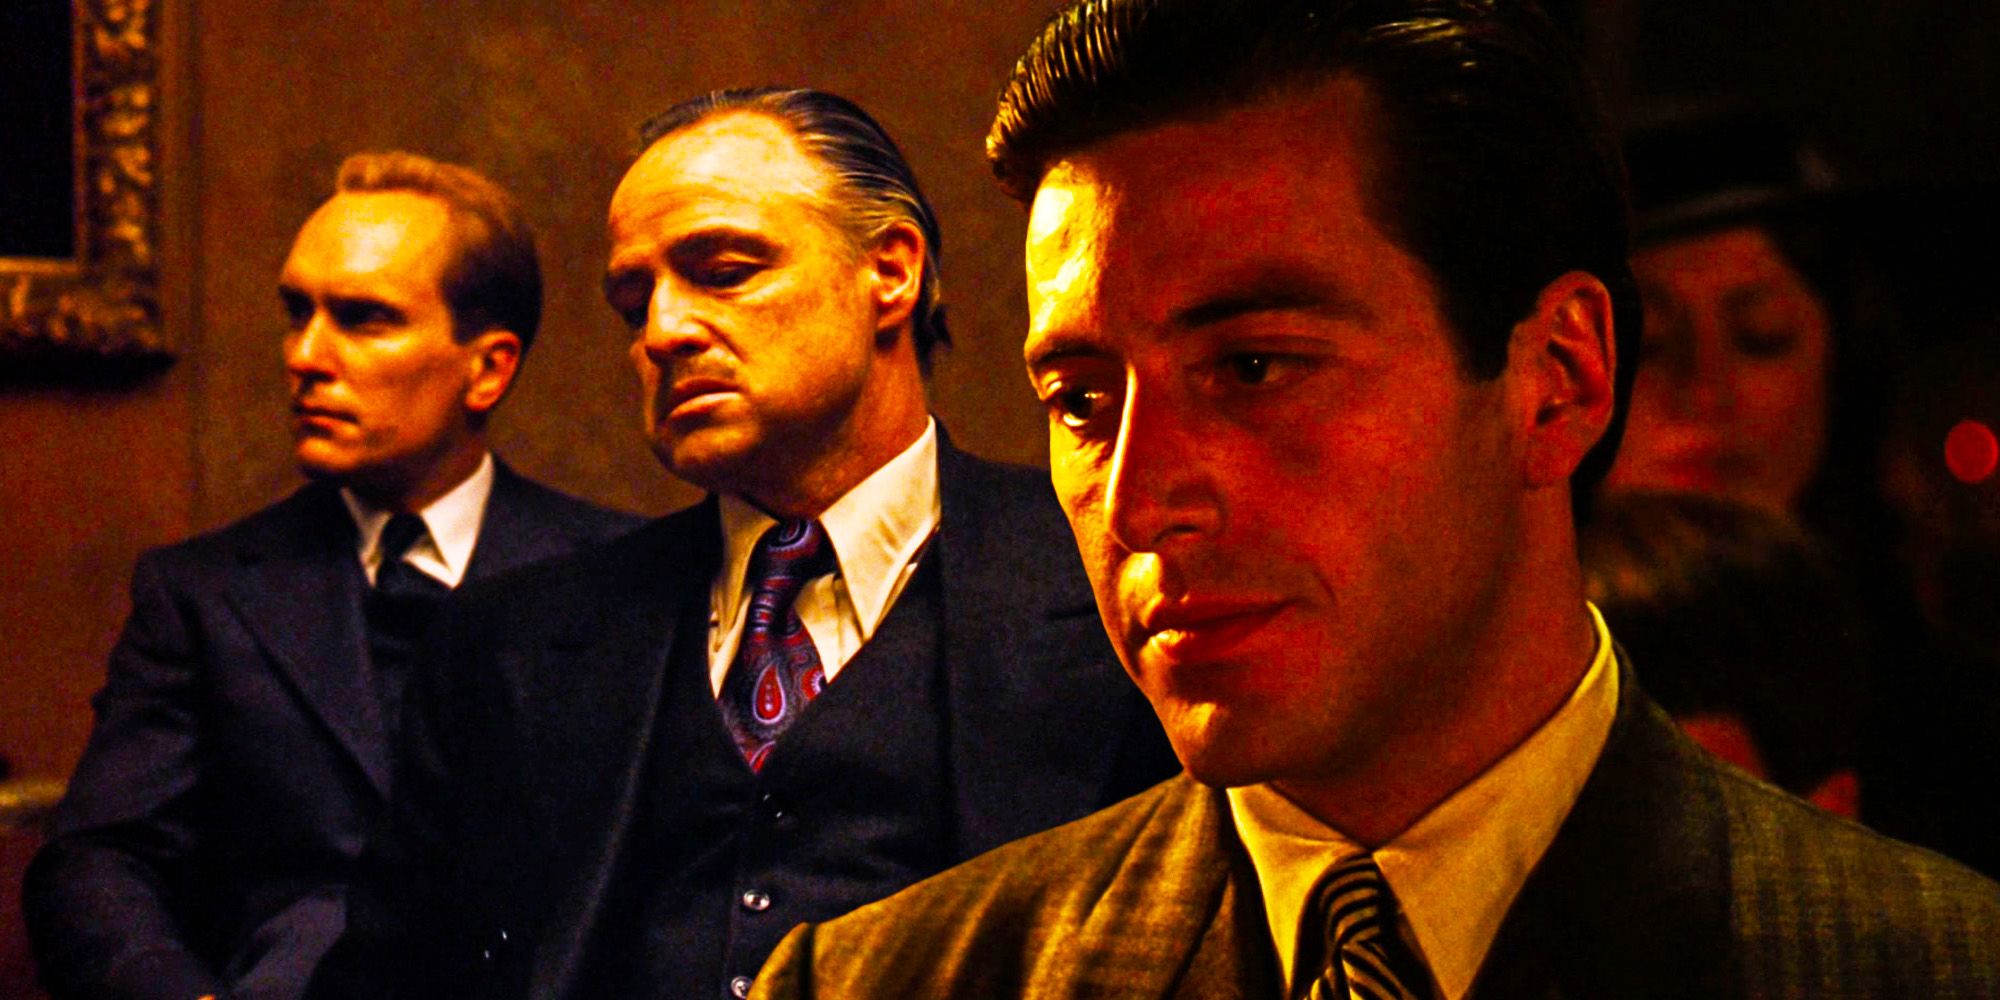 Why Marlon Brando's Character Is Called "Godfather" In The Movie